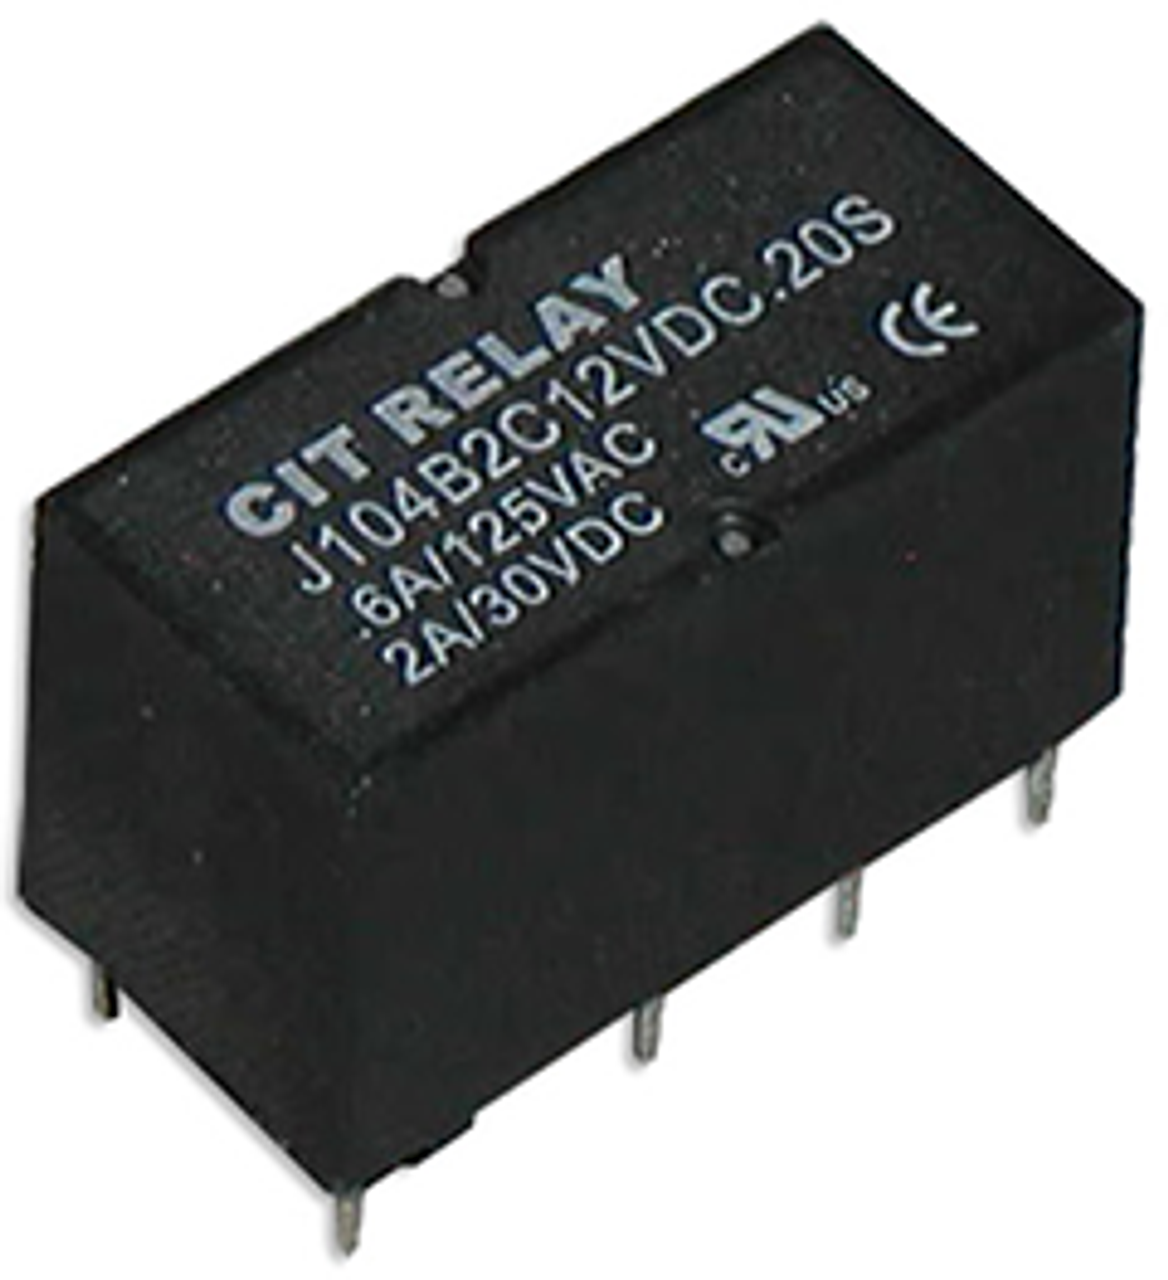 CIT Relay and Switch J104B2C12VDC.20S Power Relays